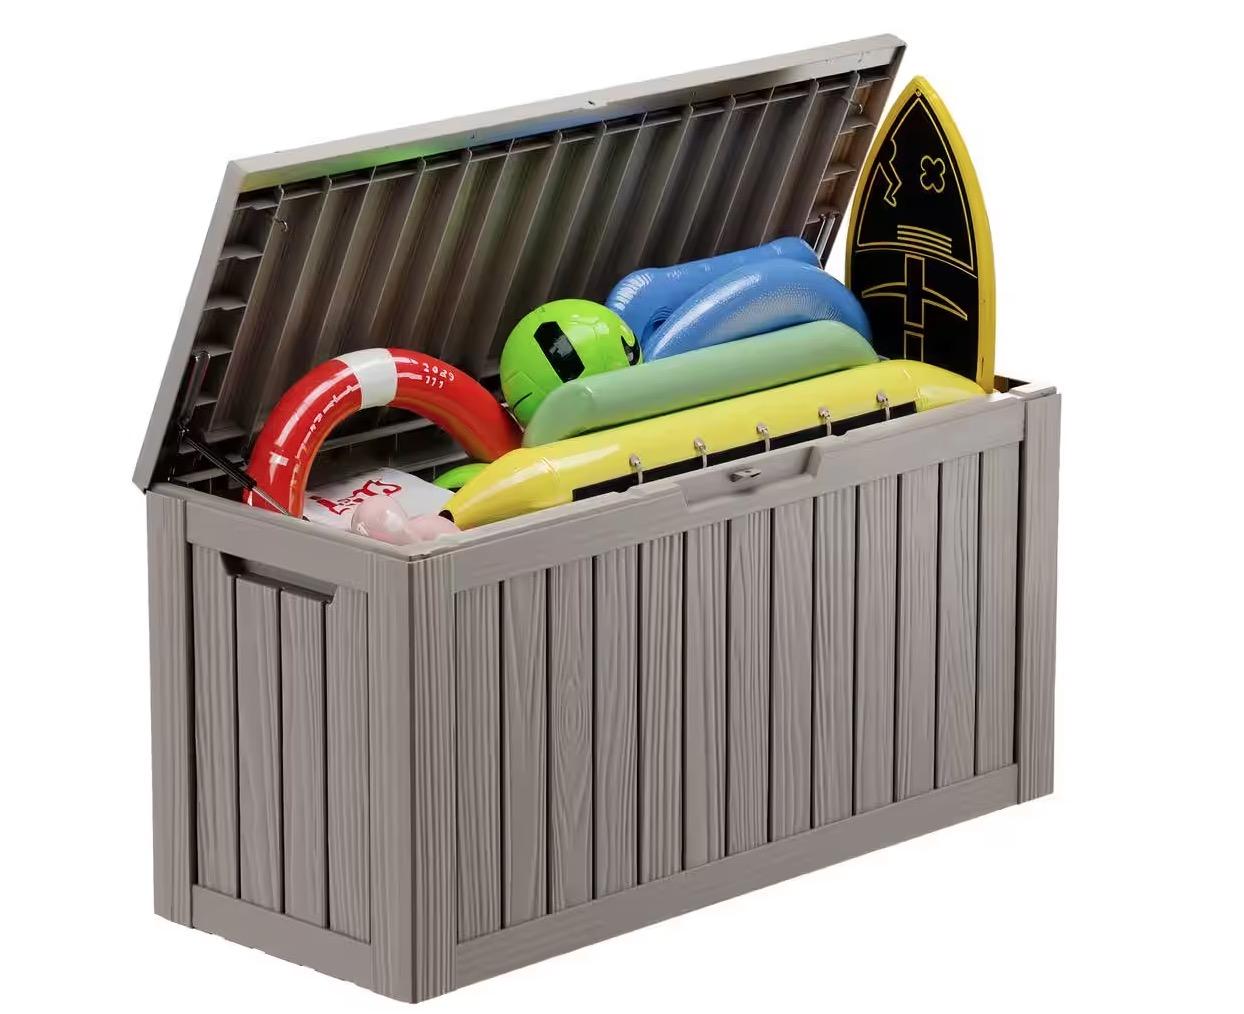 EasyUp Resin Outdoor Storage Deck Box for $49.99 Shipped